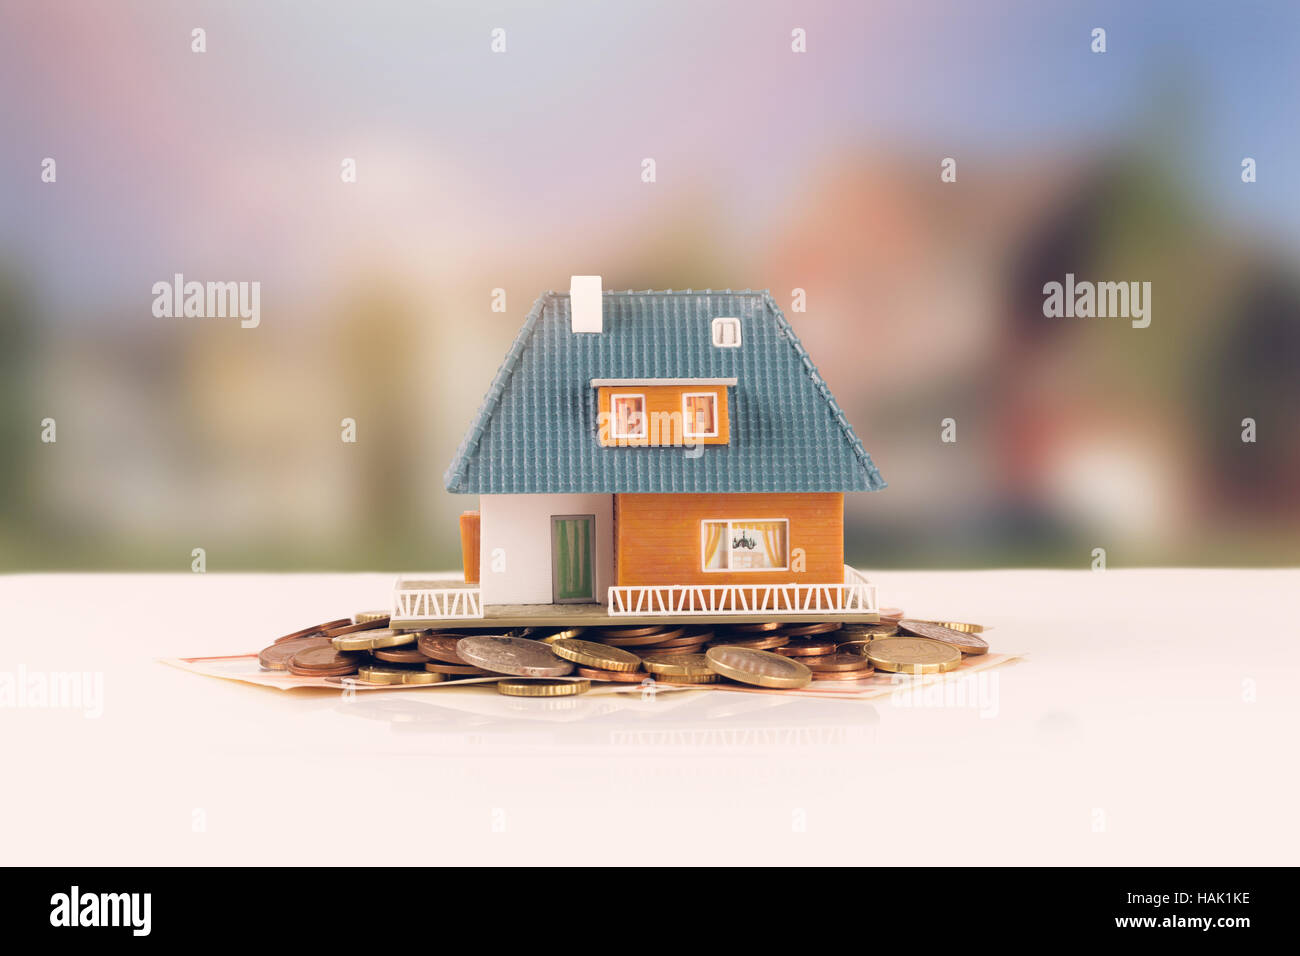 real estate investment business concept Stock Photo